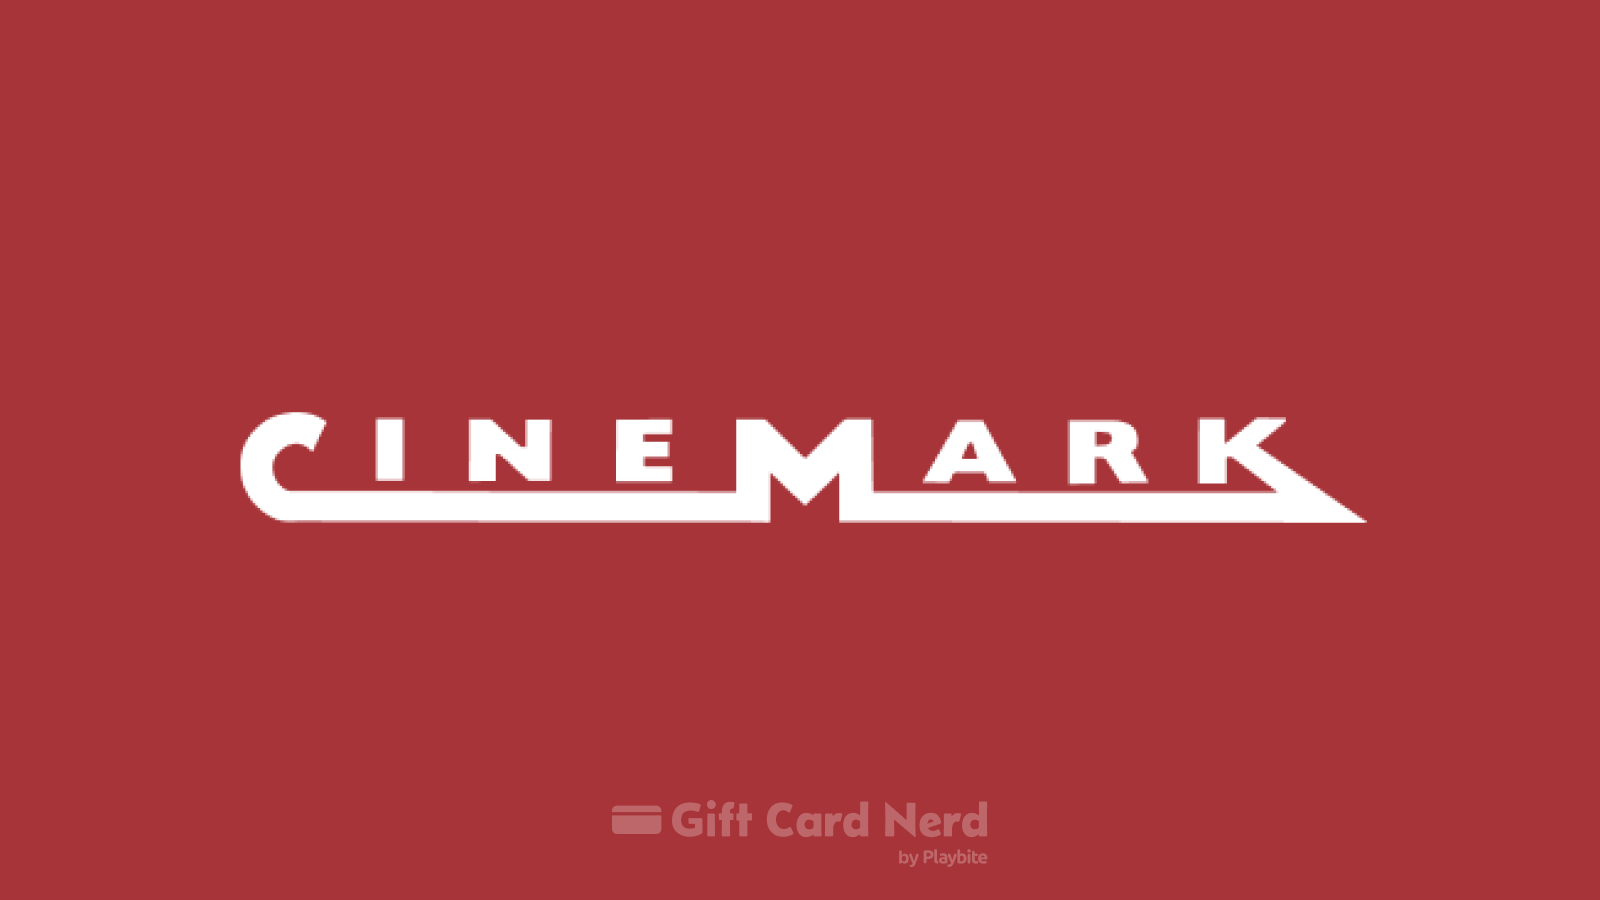 Does Game Stop Sell Cinemark Gift Cards?